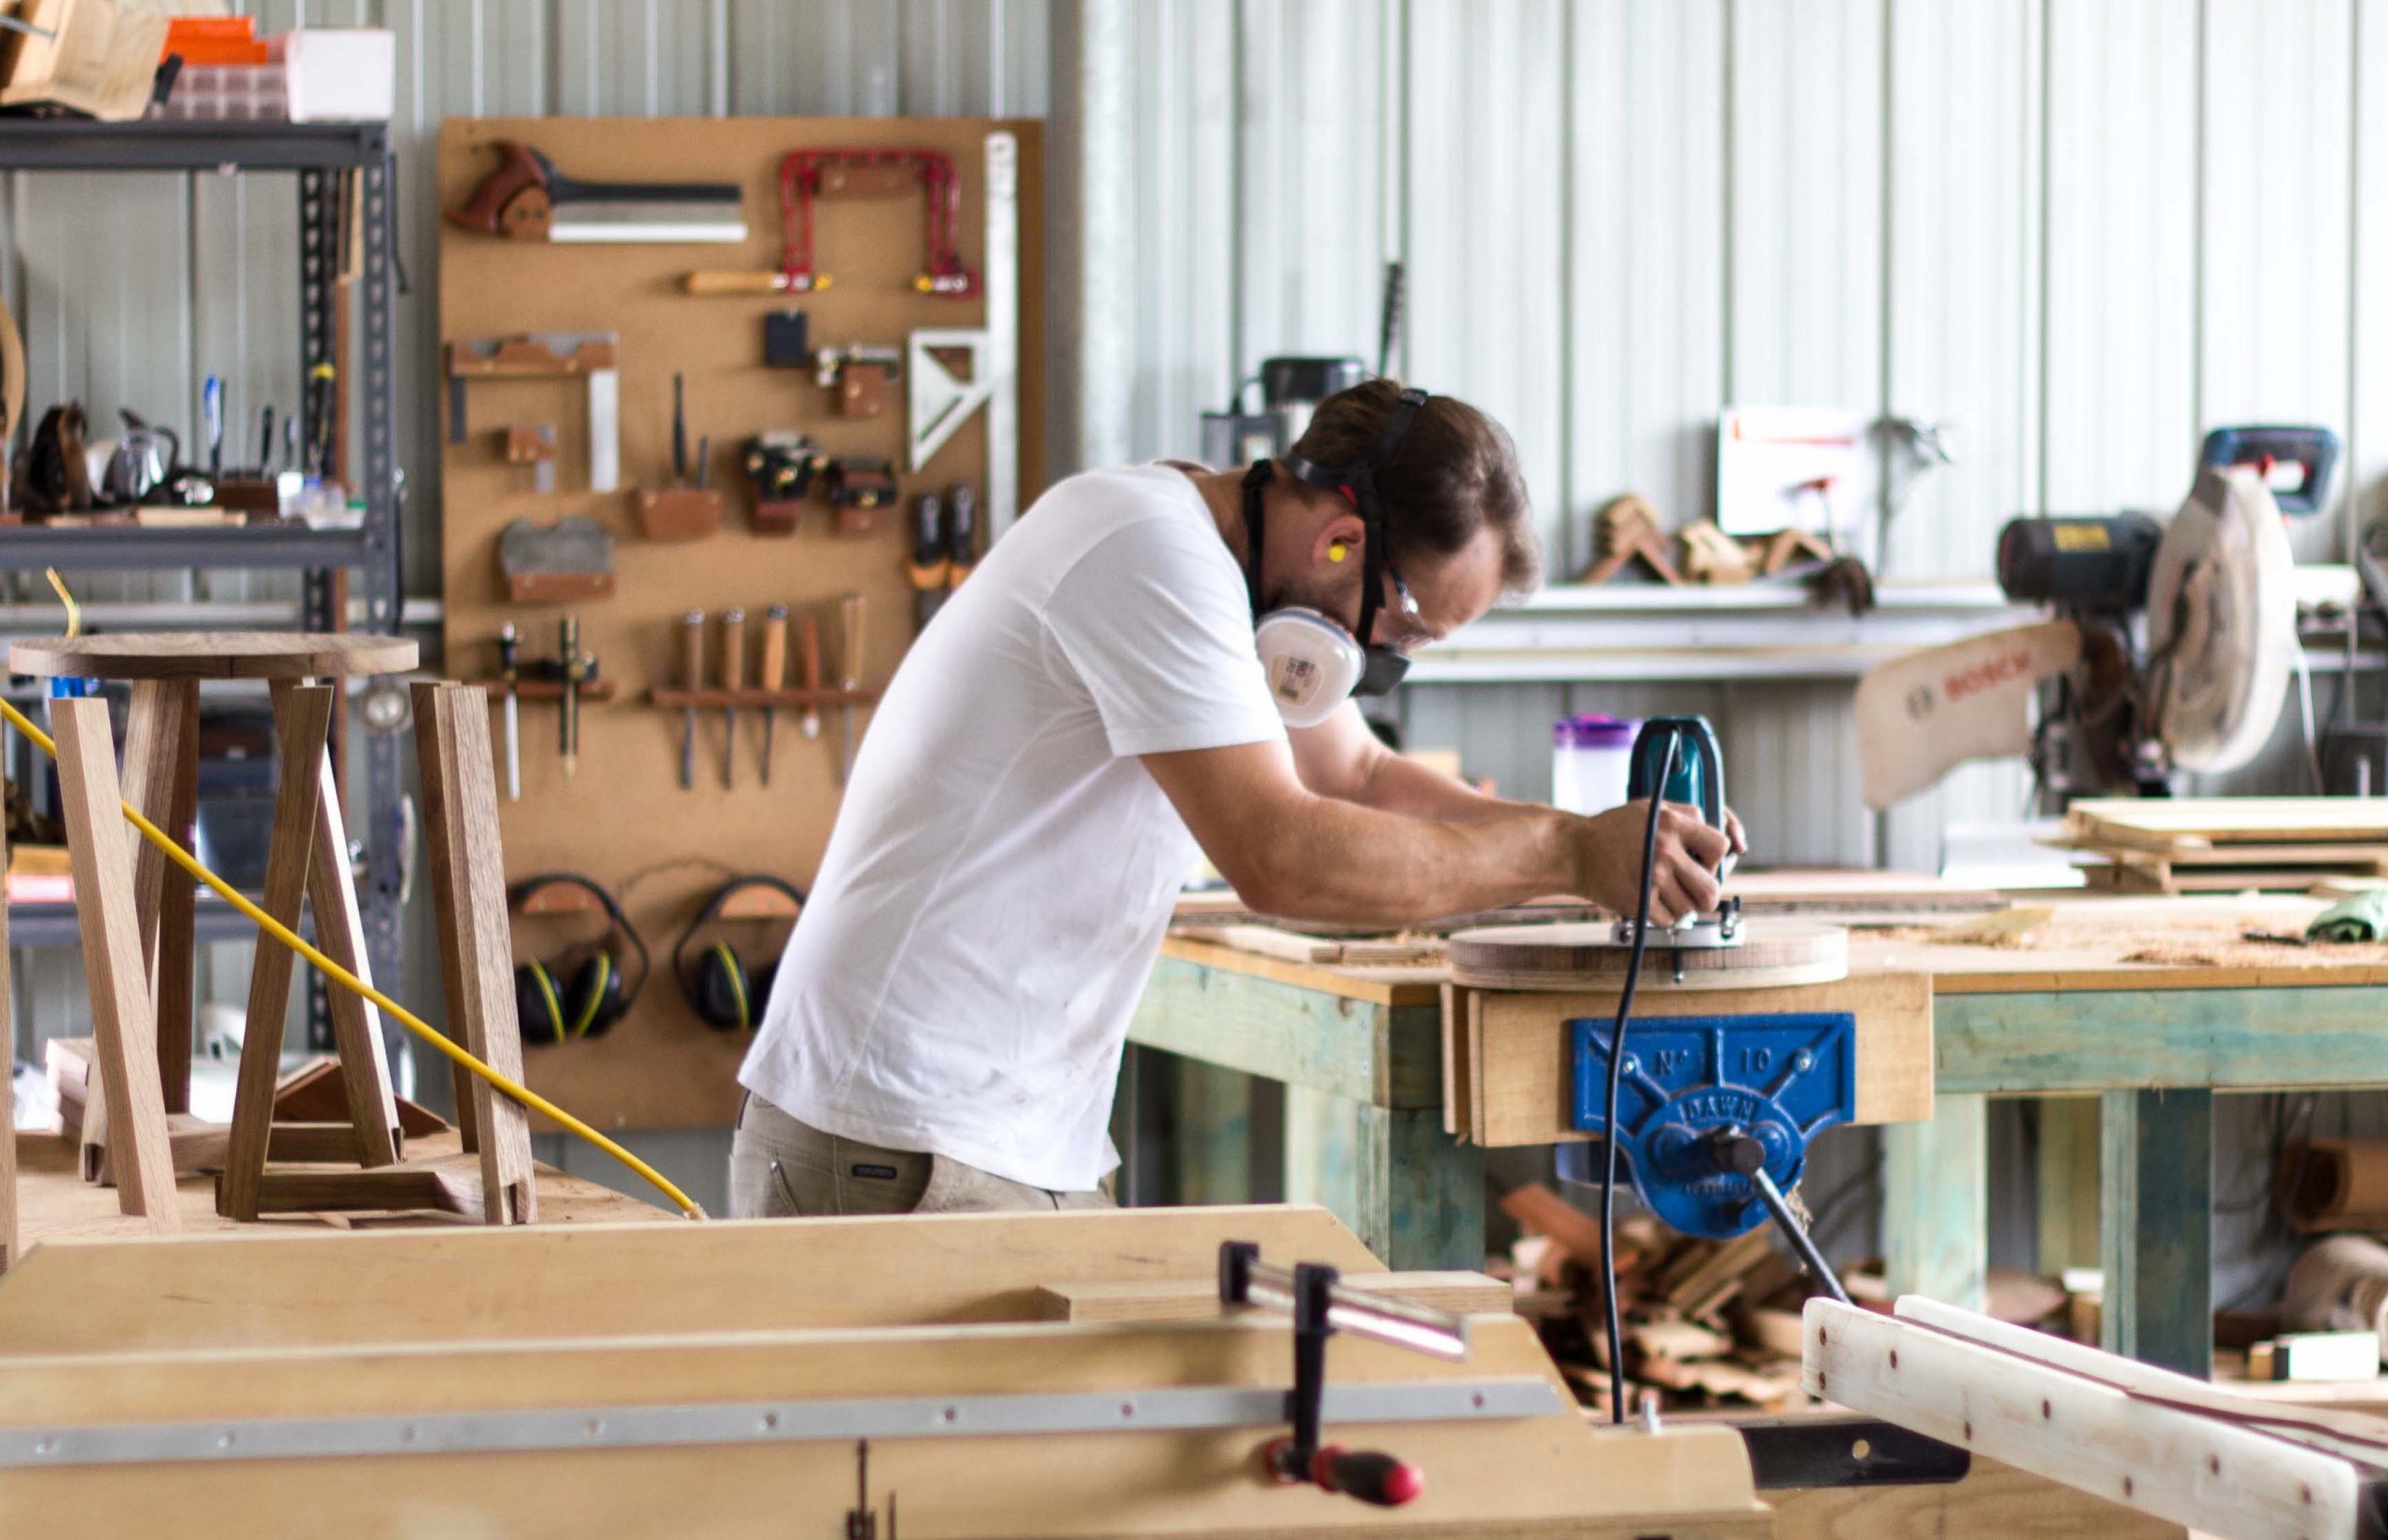 Australian Woodworking Courses Classes And Schools